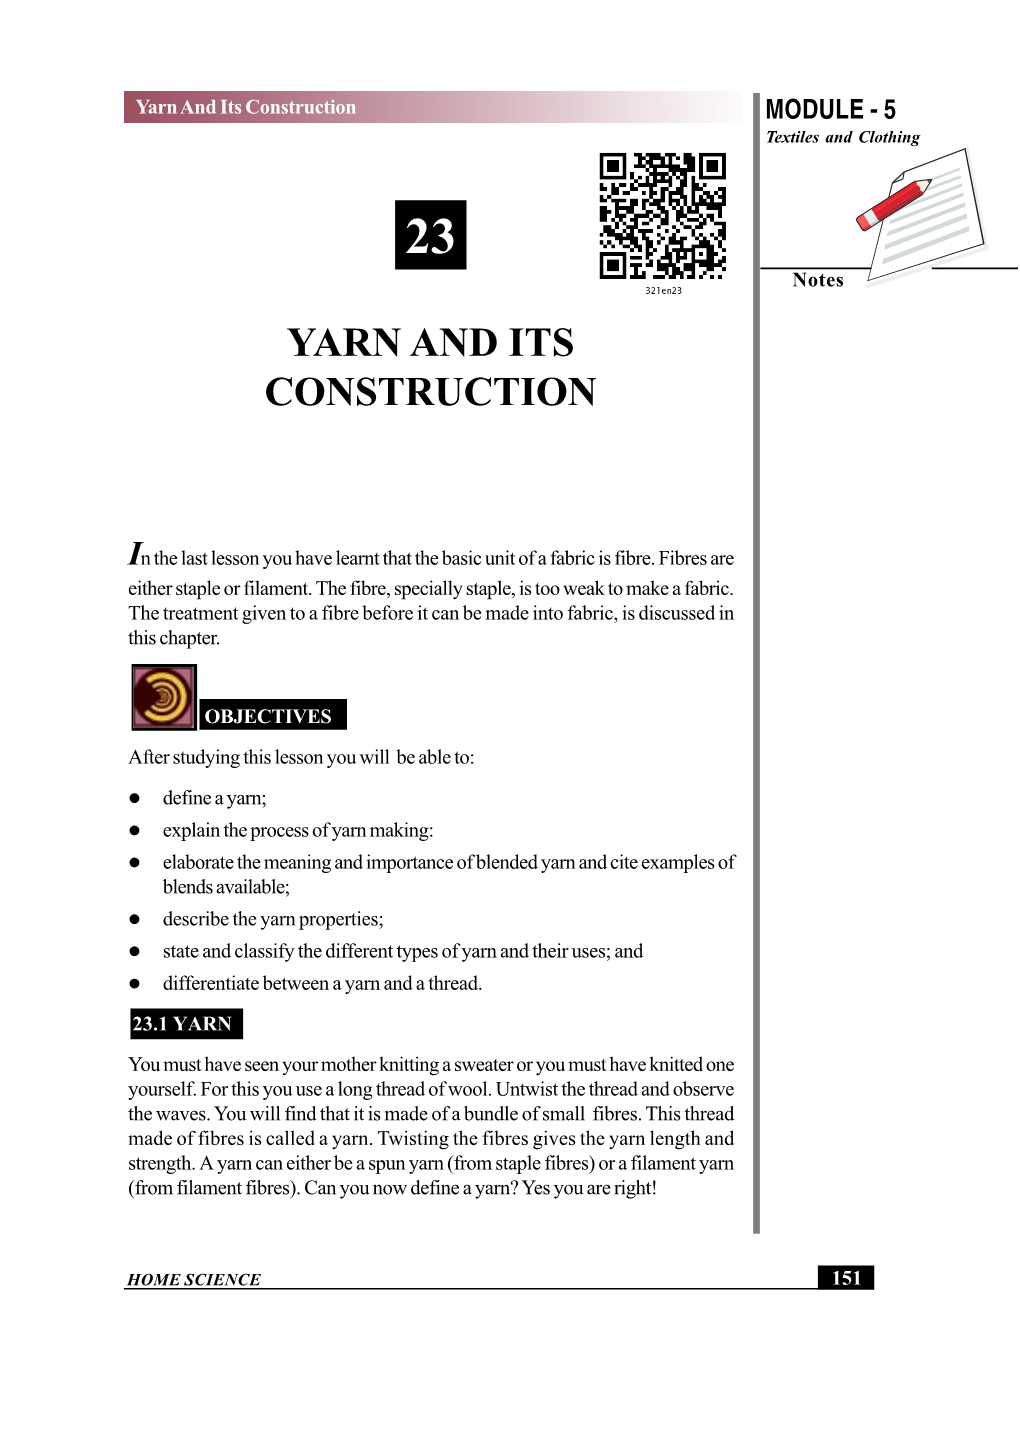 Yarn and Its Construction MODULE - 5 Textiles and Clothing